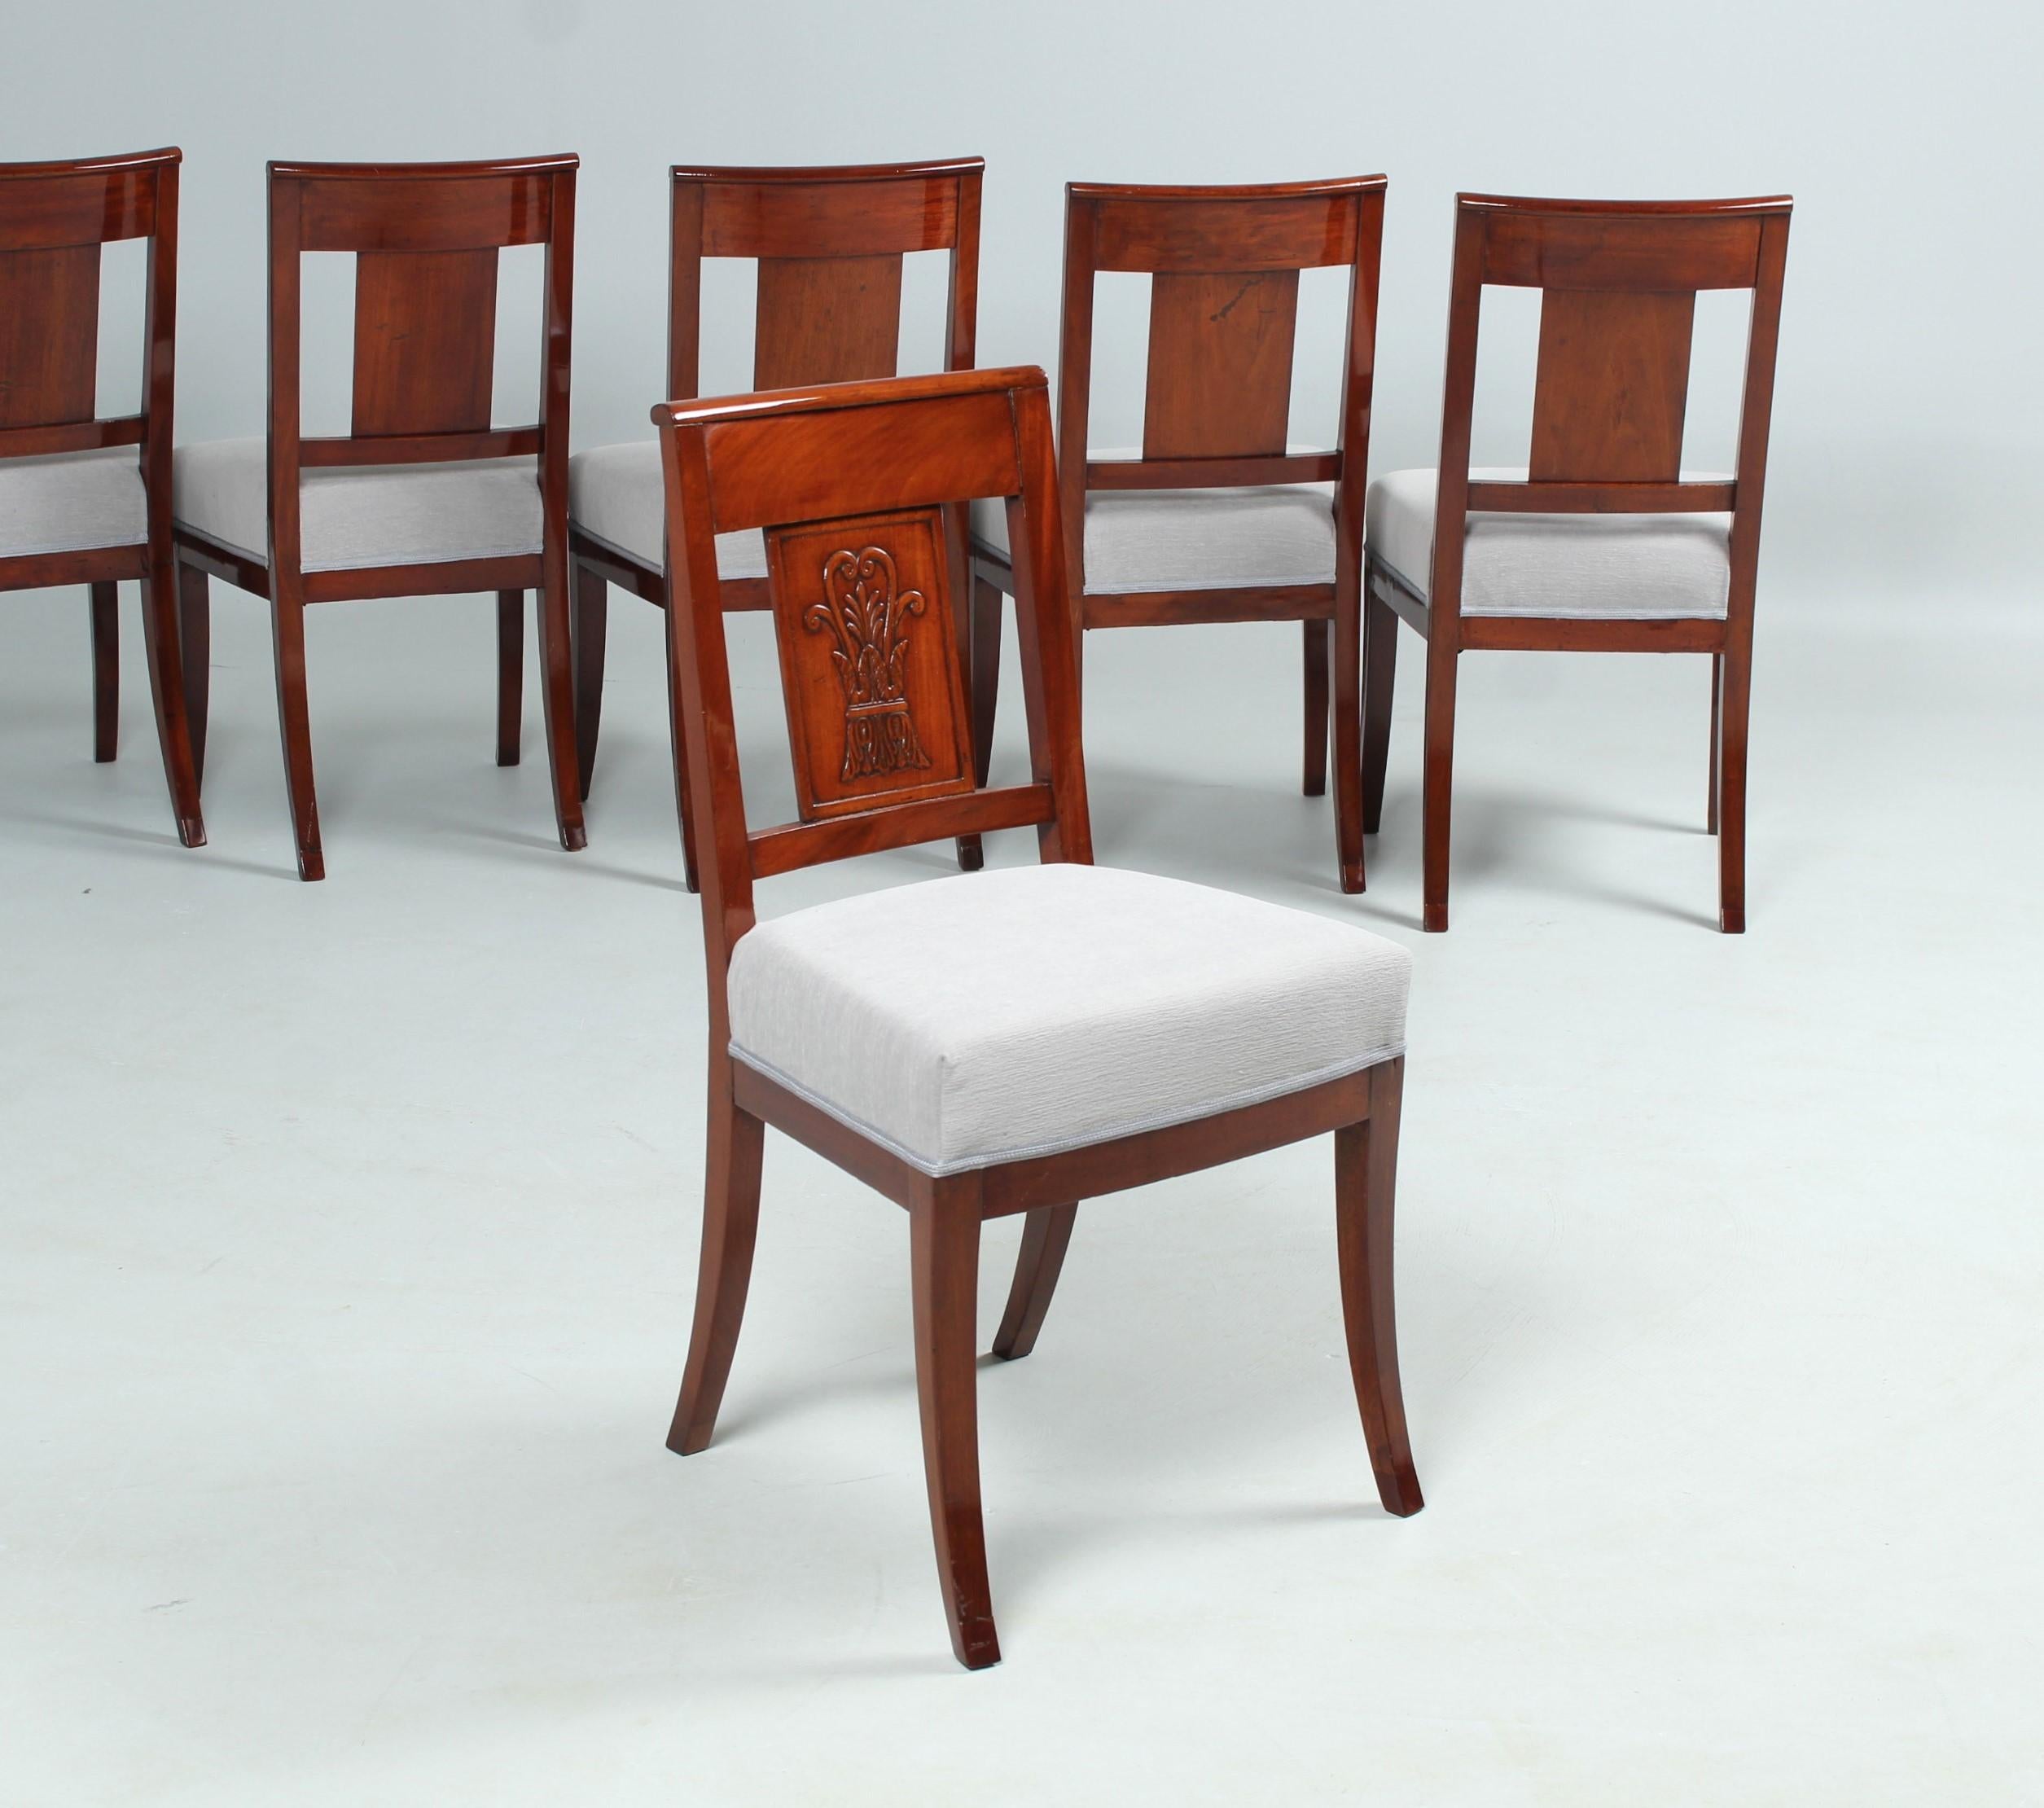 Set of six antique chairs

France
mahogany
early 19th century

Dimensions: H x W x D: 88 x 47 x 44 cm, seat height: 48 cm

Description:
Set of six French directoire chairs in mahogany.

The square legs are curved flared, taper discreetly downward